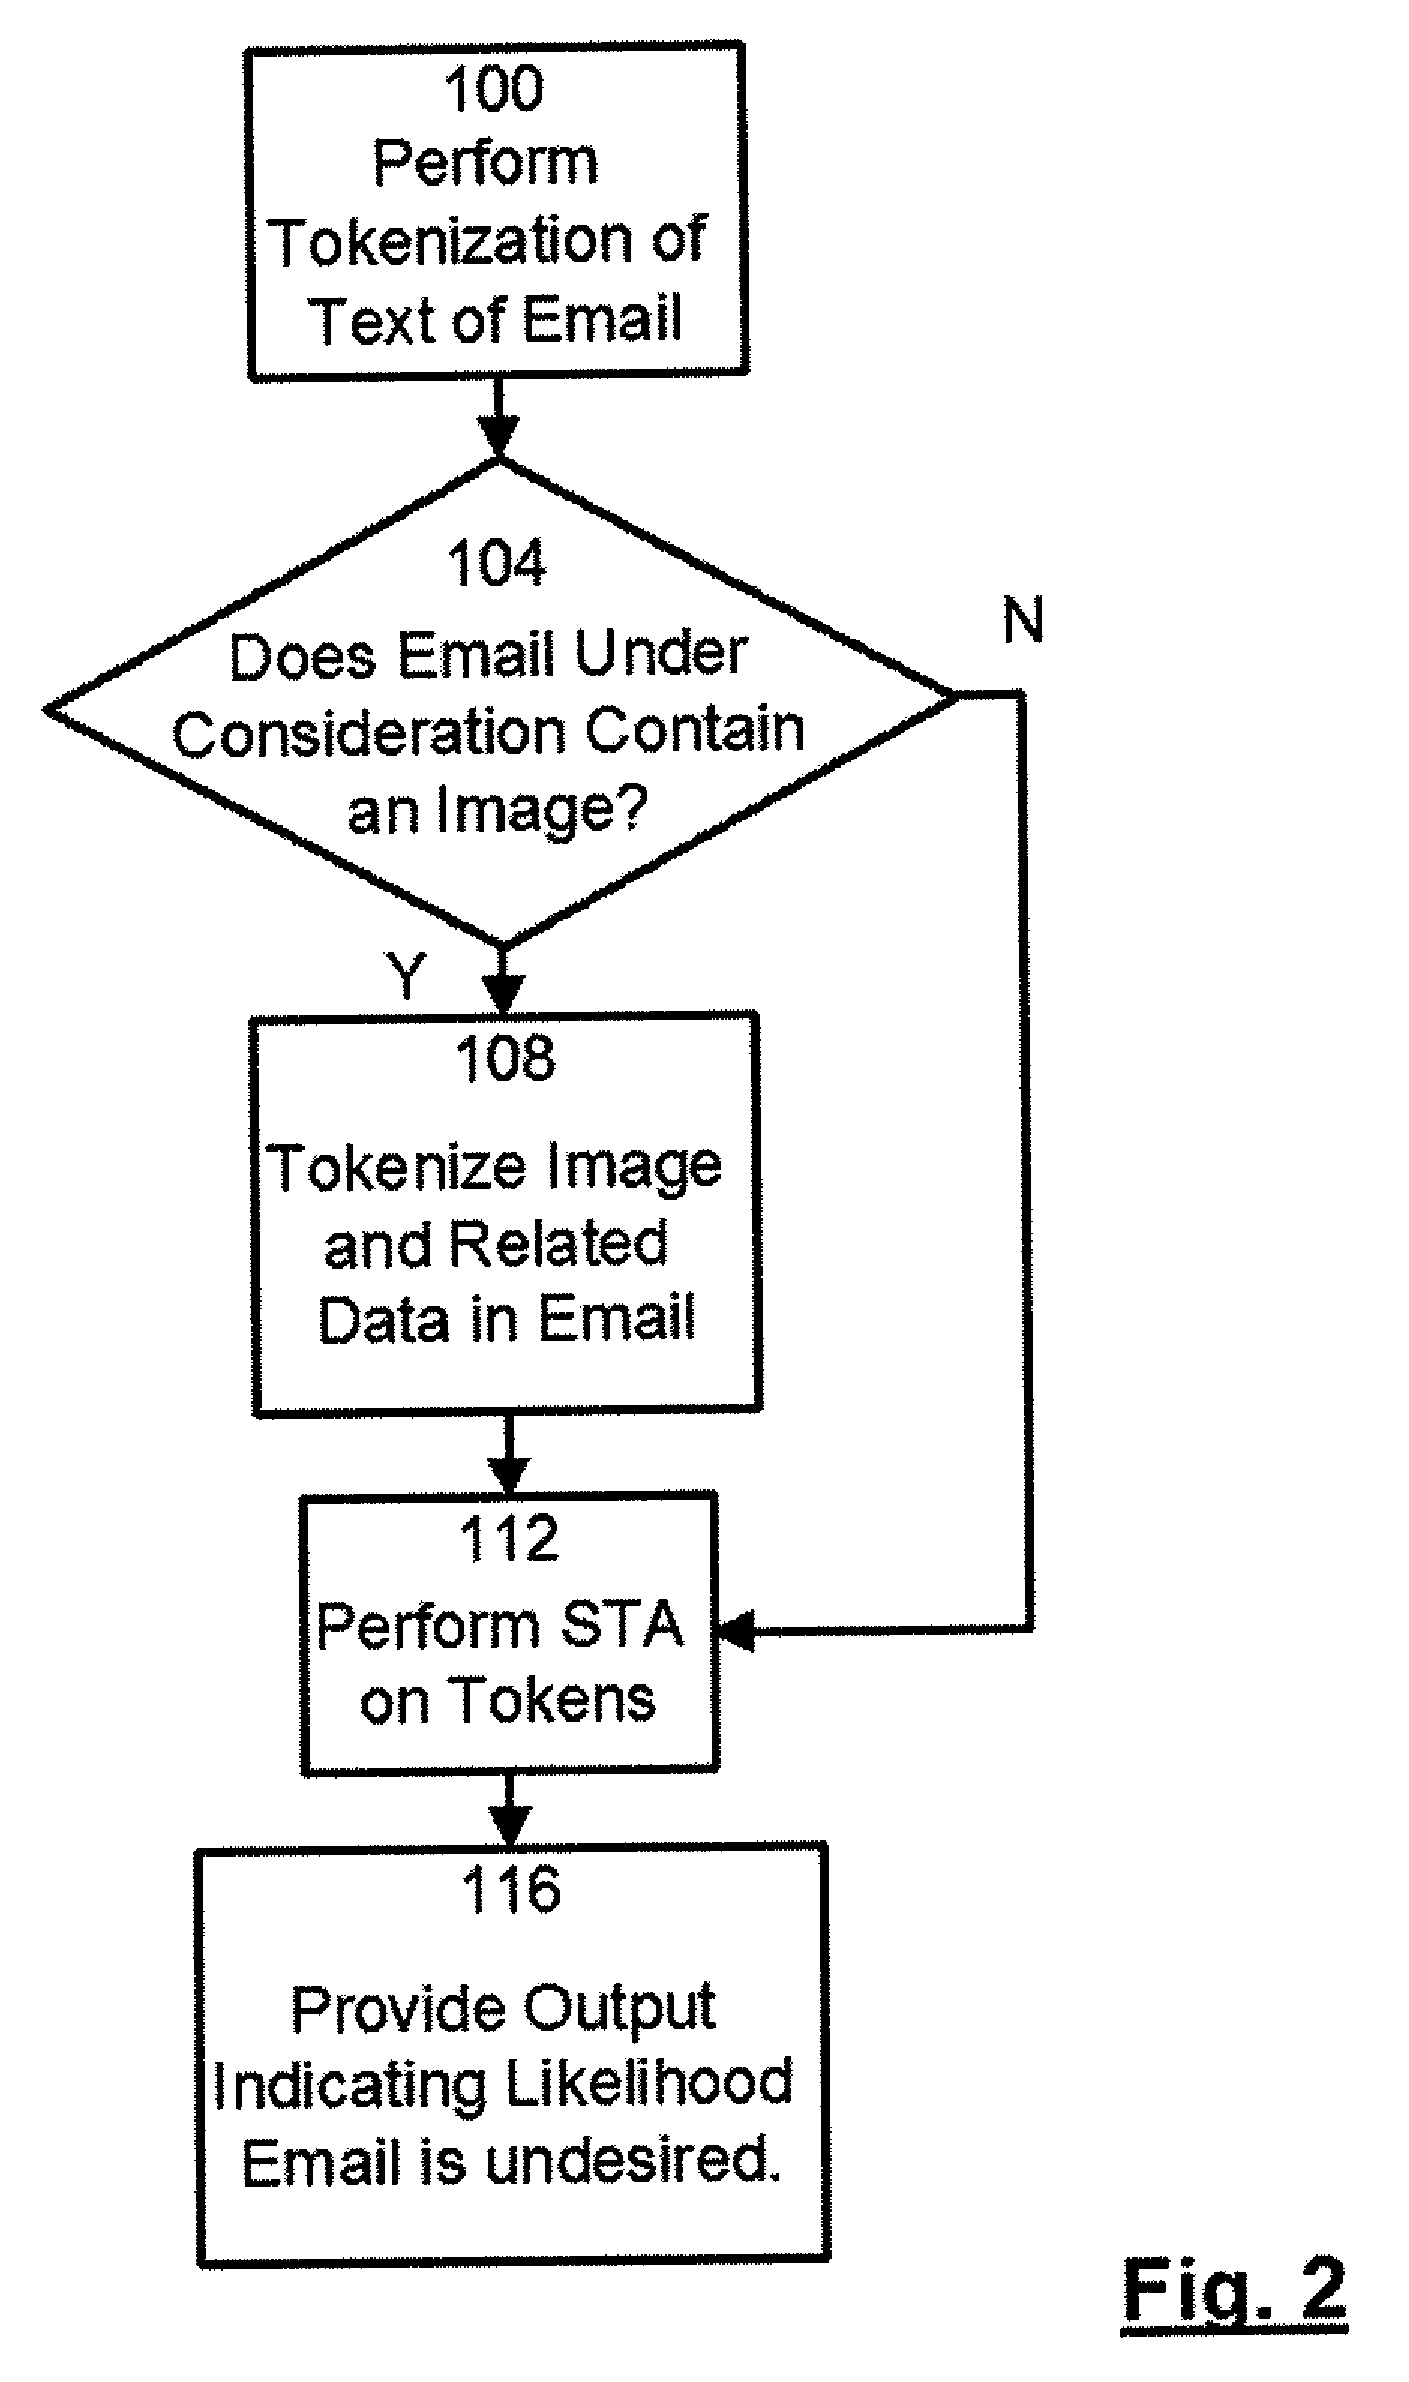 Method and system for detecting undesired email containing image-based messages